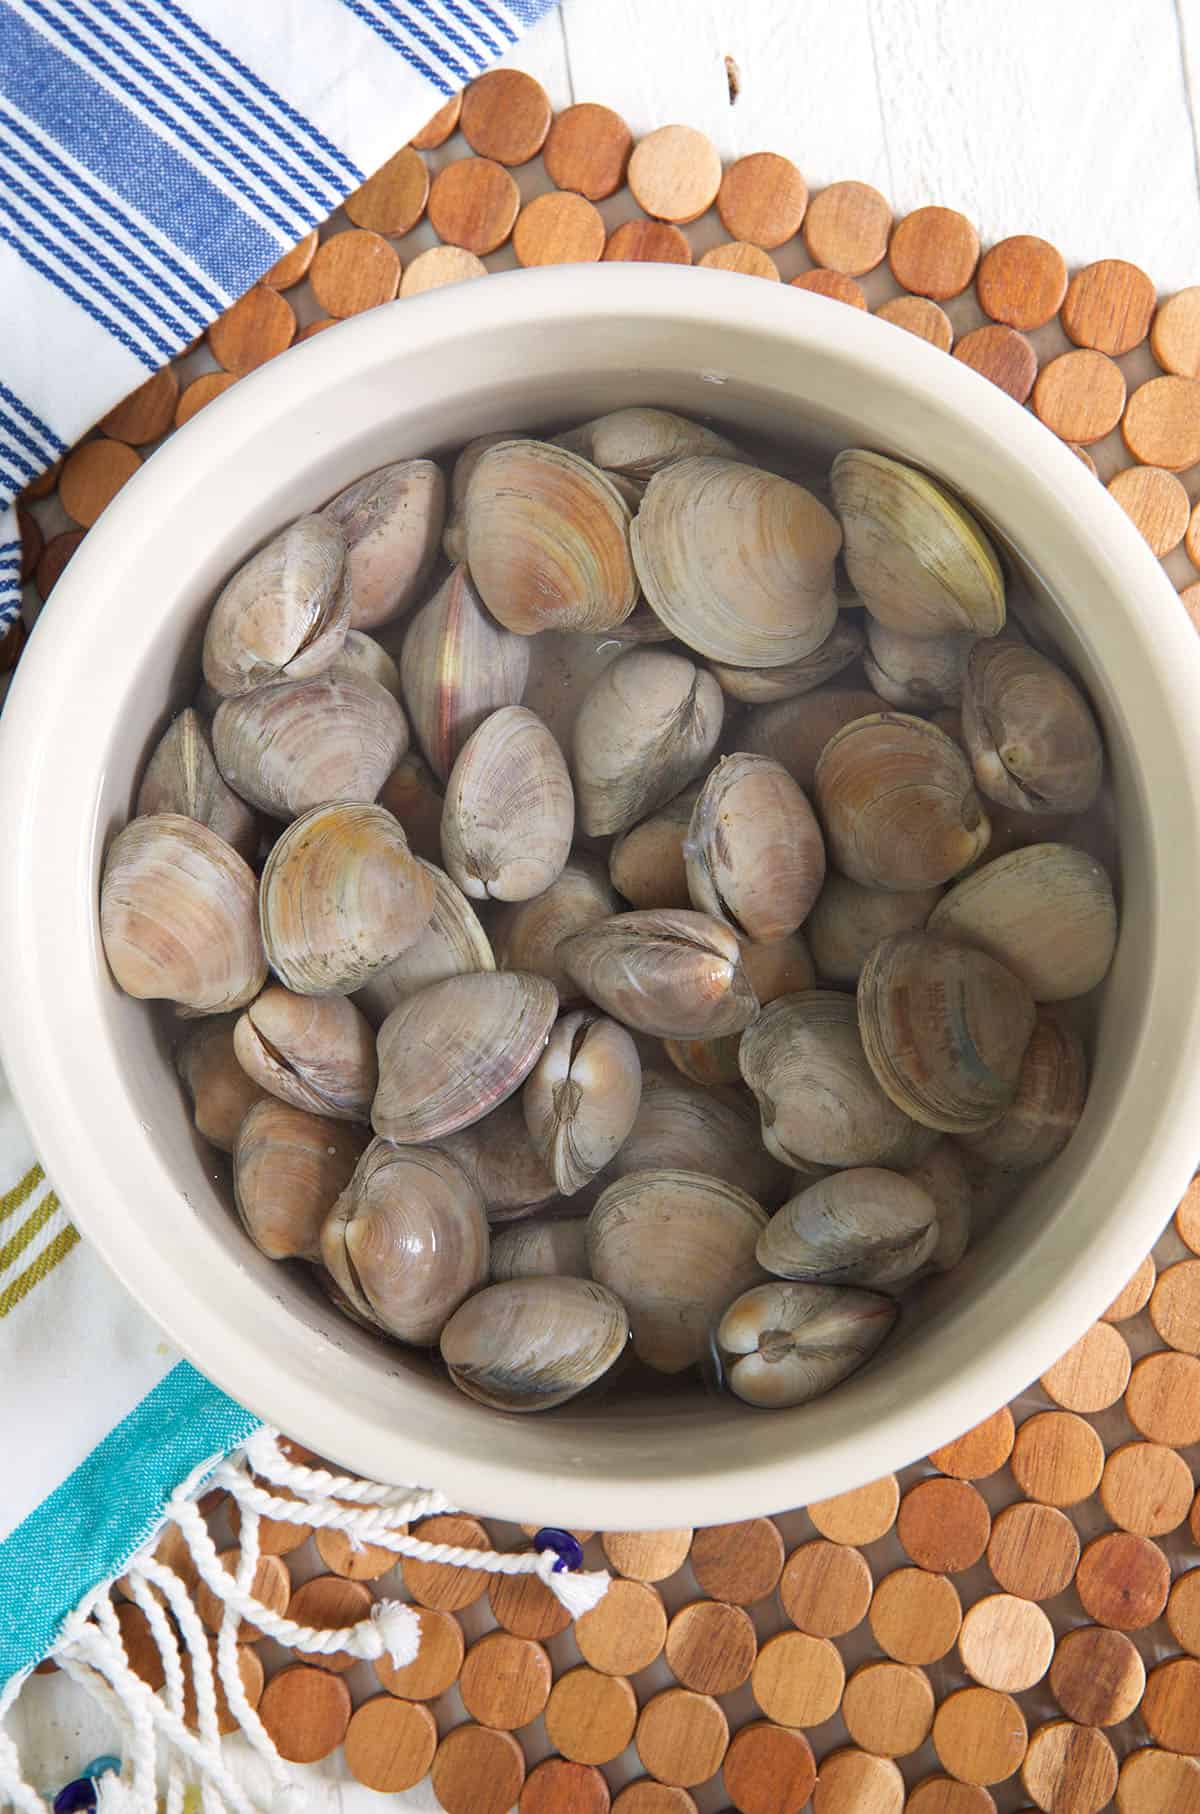 Clams are soaking in a pot filled with water.